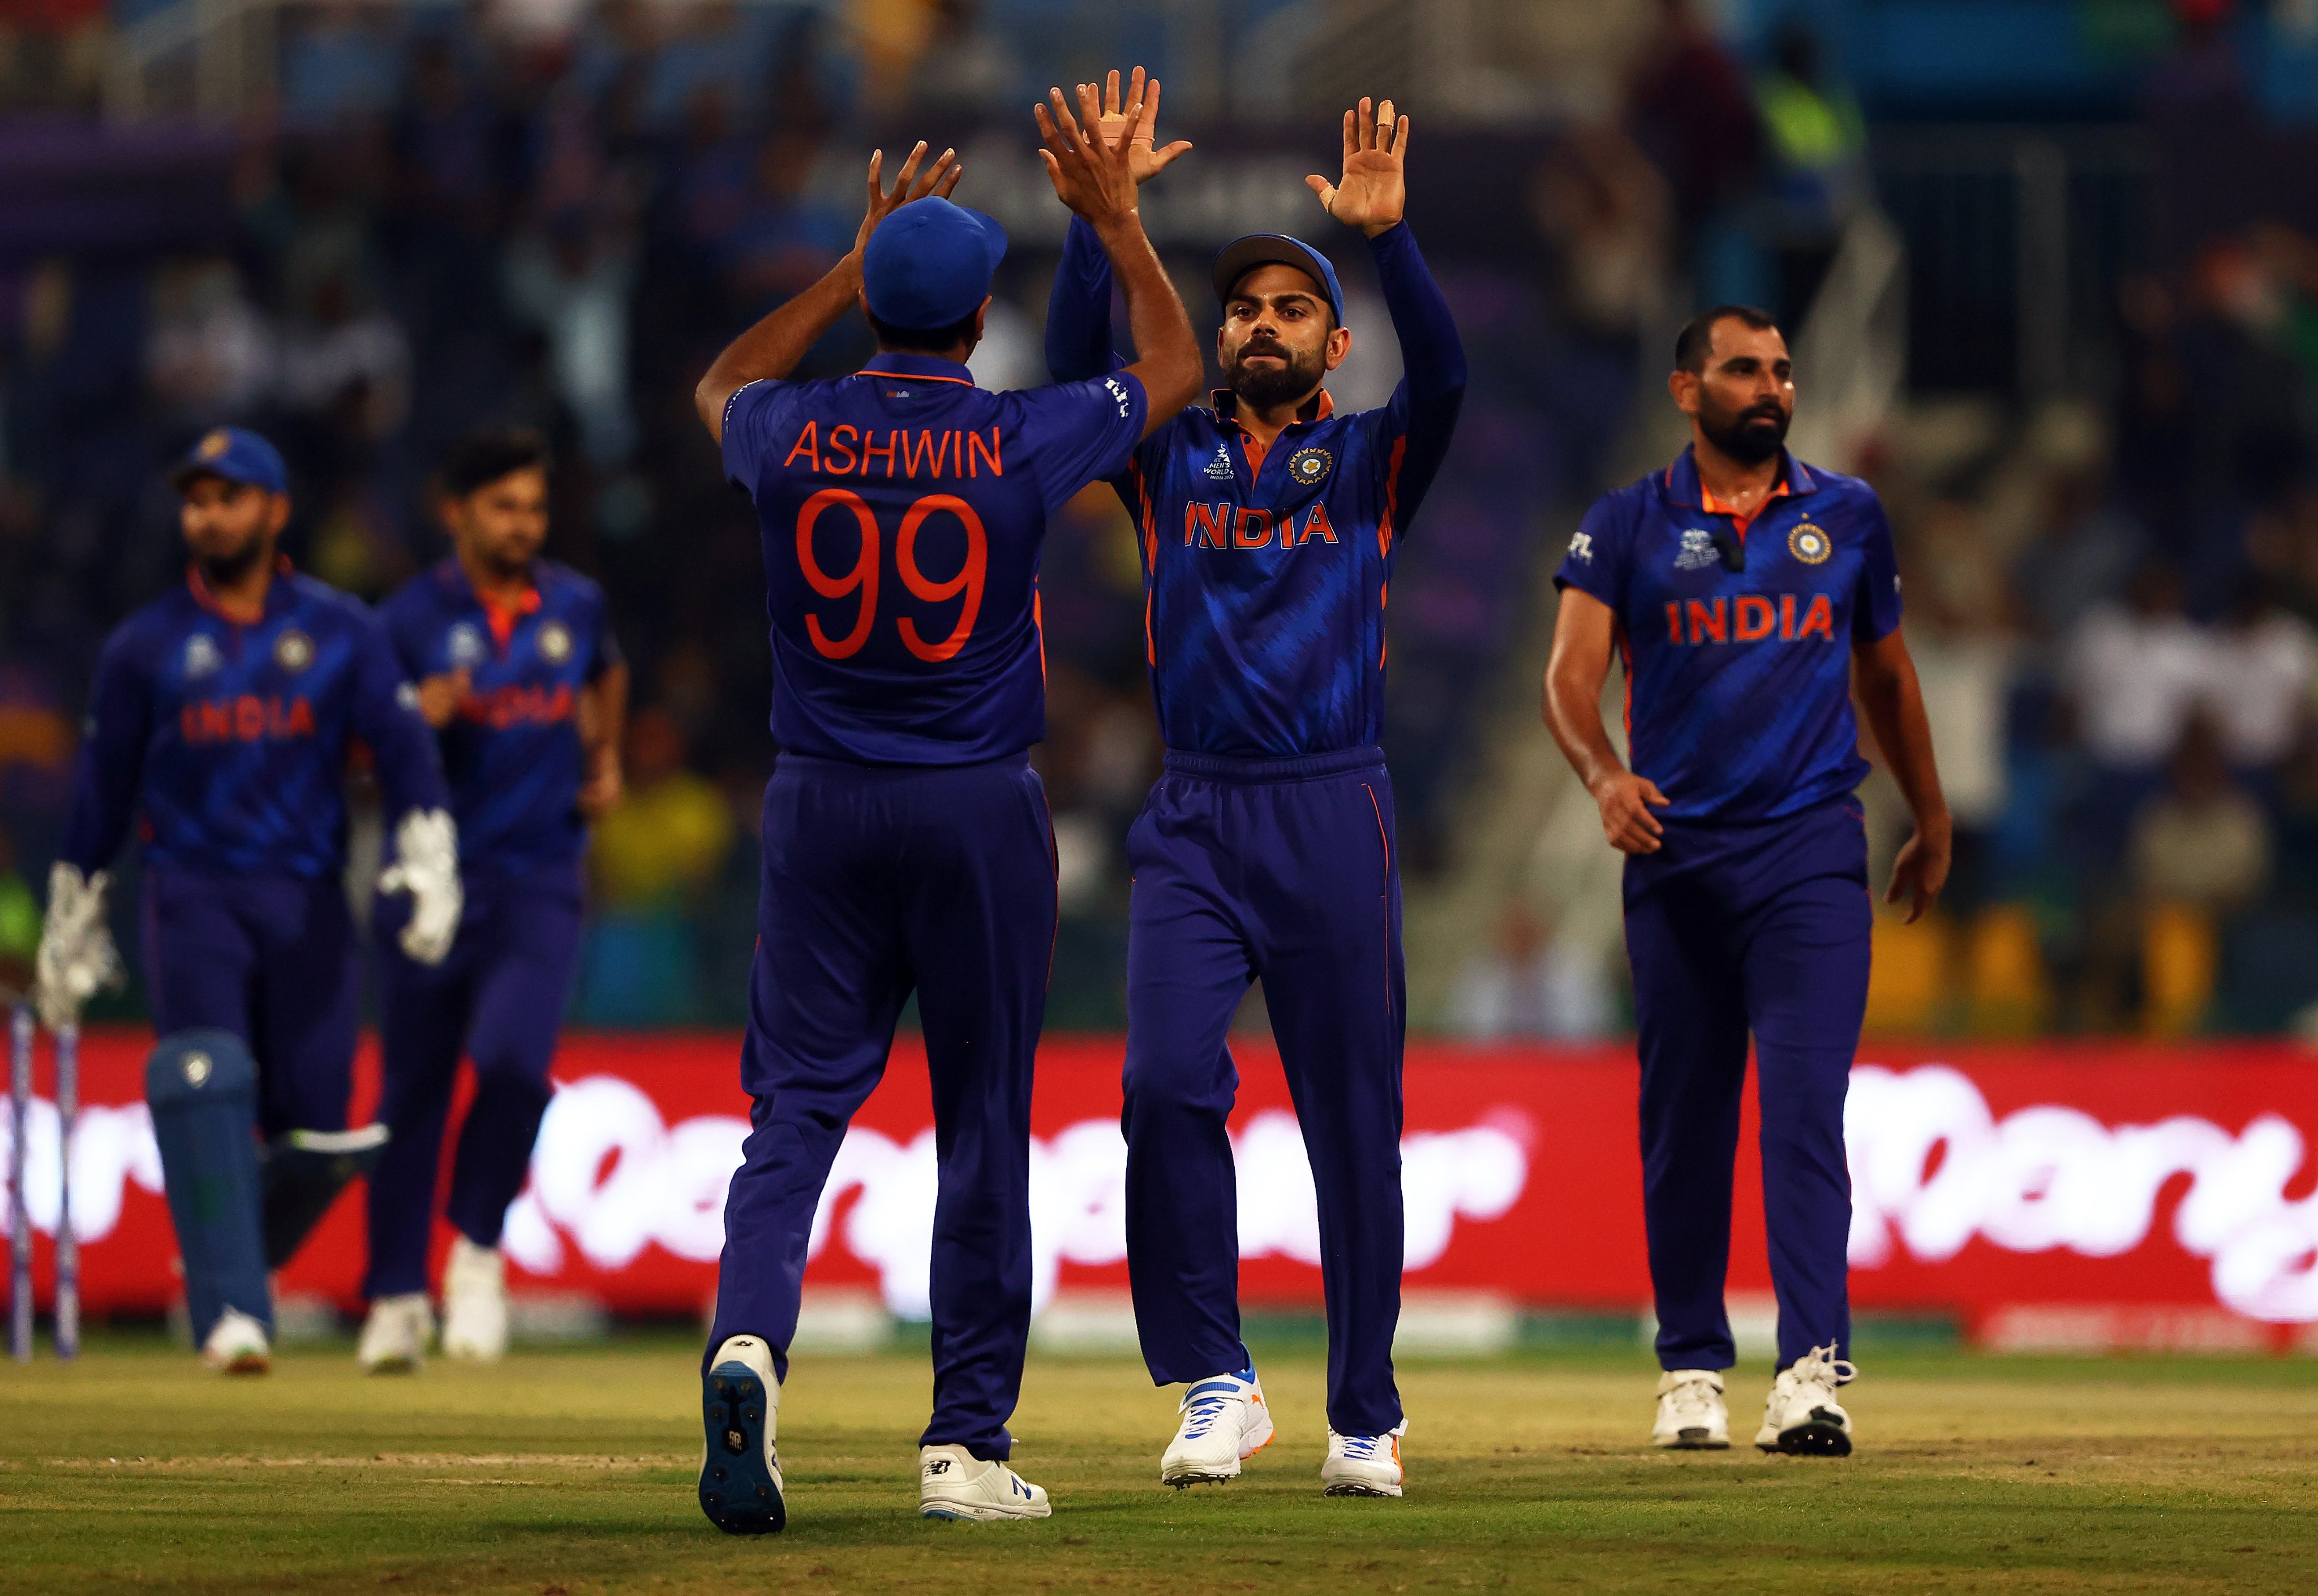 IND vs AFG | Twitter reacts as India thrash Afghanistan to register their first victory in T20 World Cup 2021 